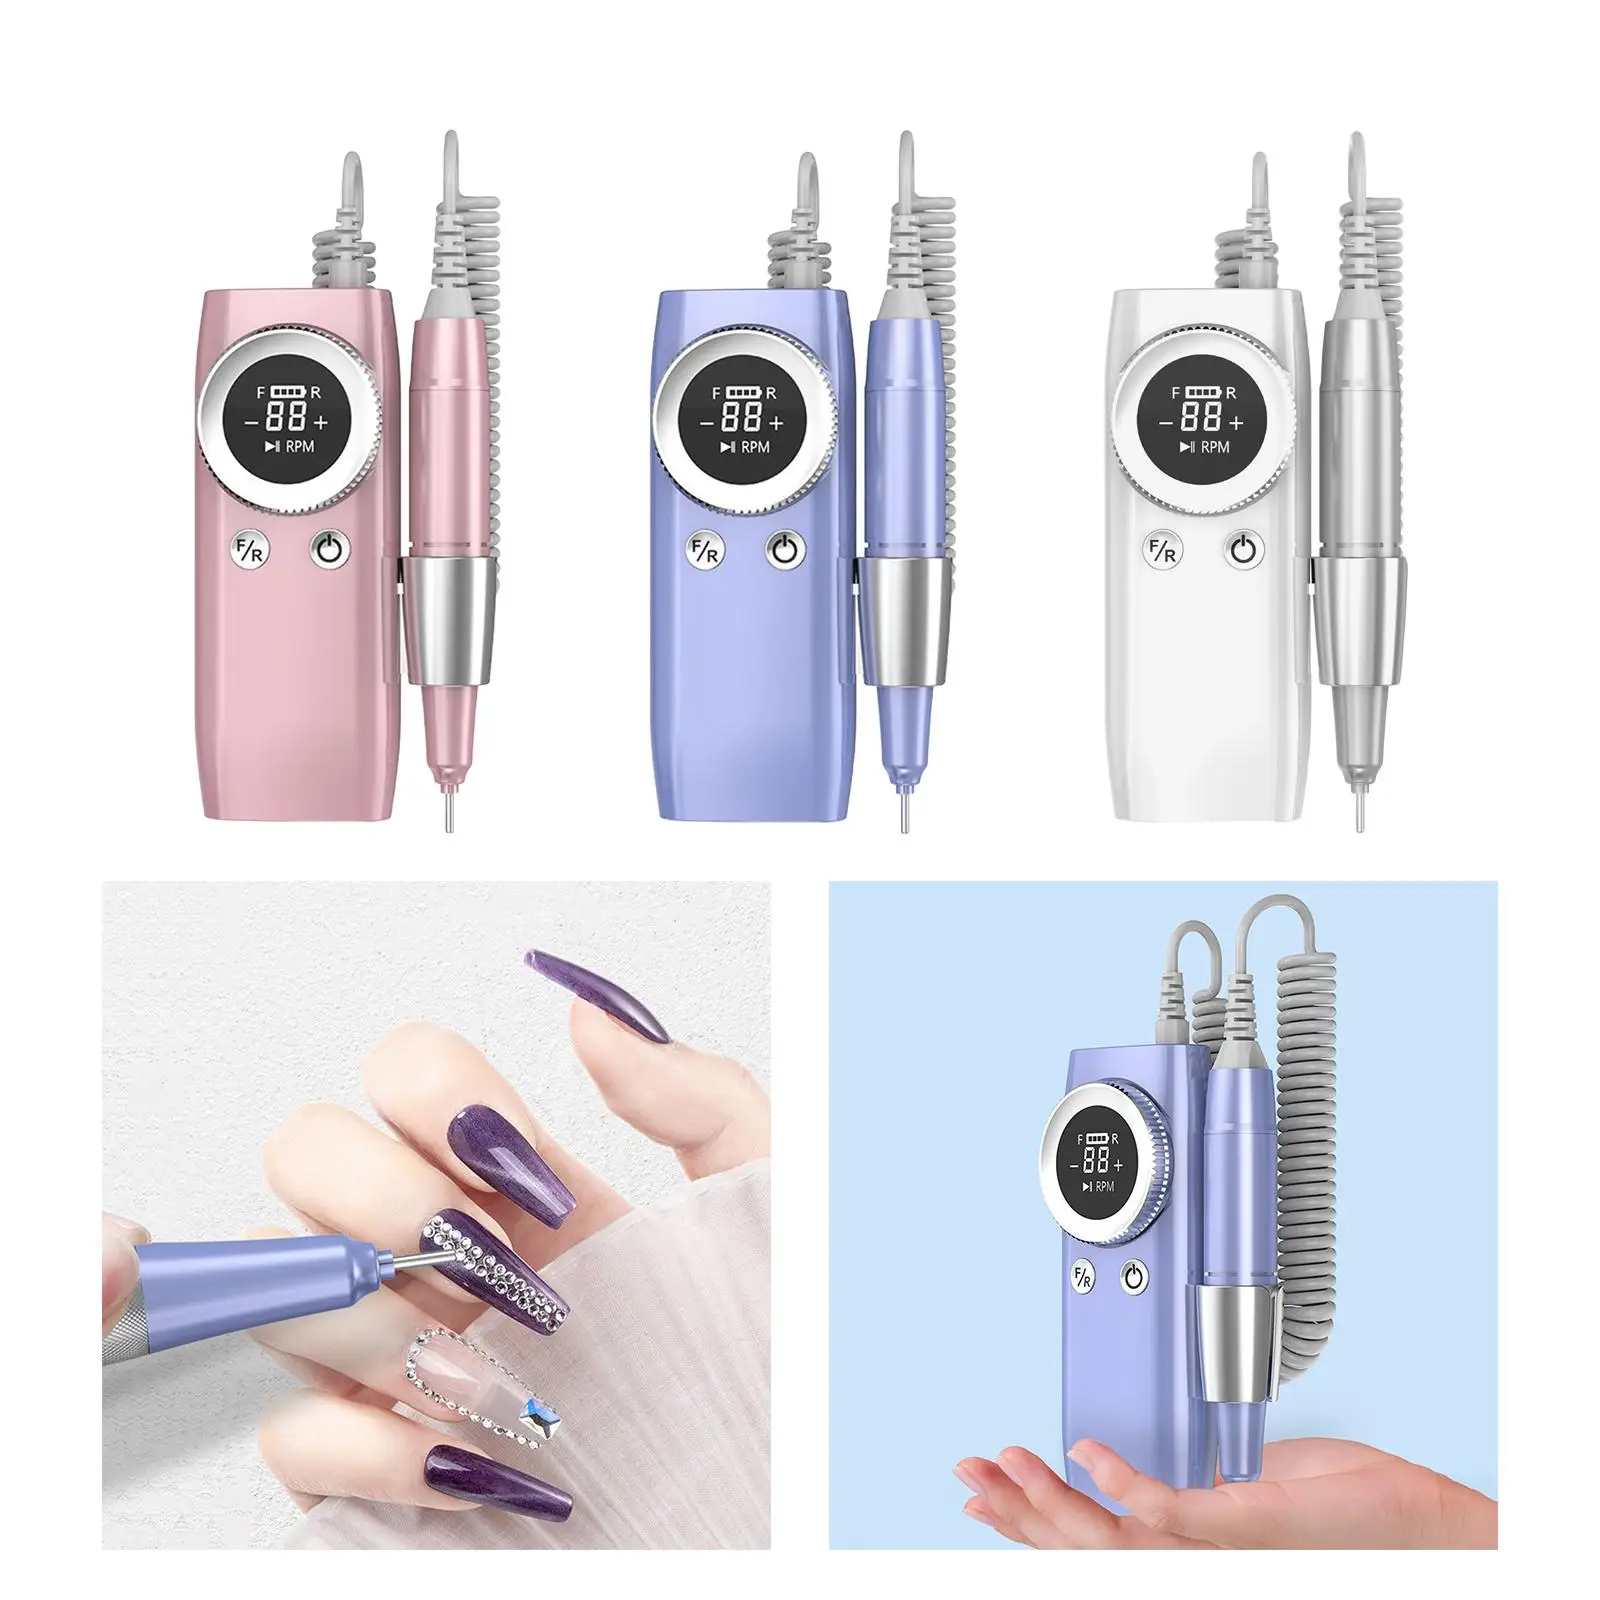 Nail File Machine 45000 RPM 36W for Nails Polishing Rechargeable Salon Home